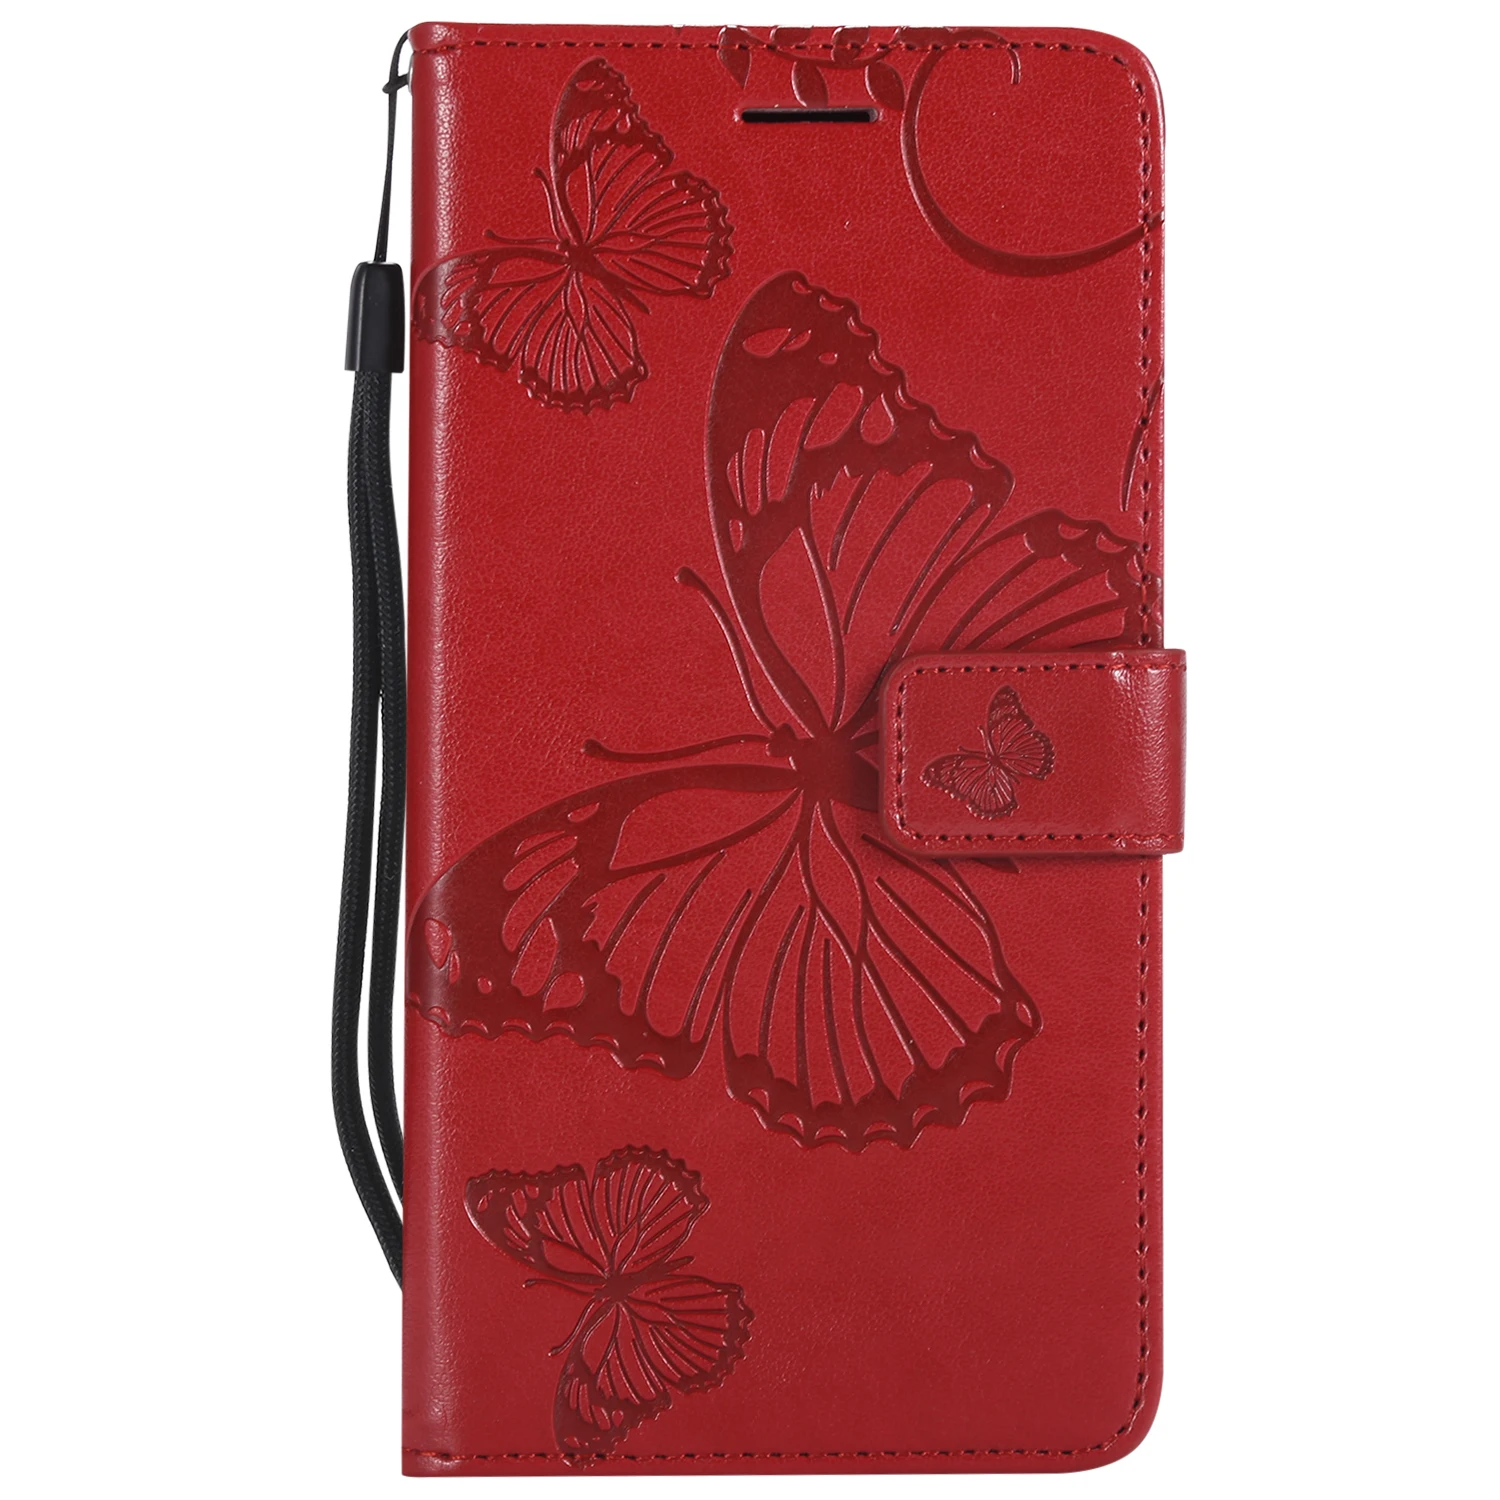 

Butterfly Pattern Case For huawei Y5 Y6 Y7 Prime pro 2018 2017 2019 Case Back Cover Wallet Leather mobile phone cases A6503